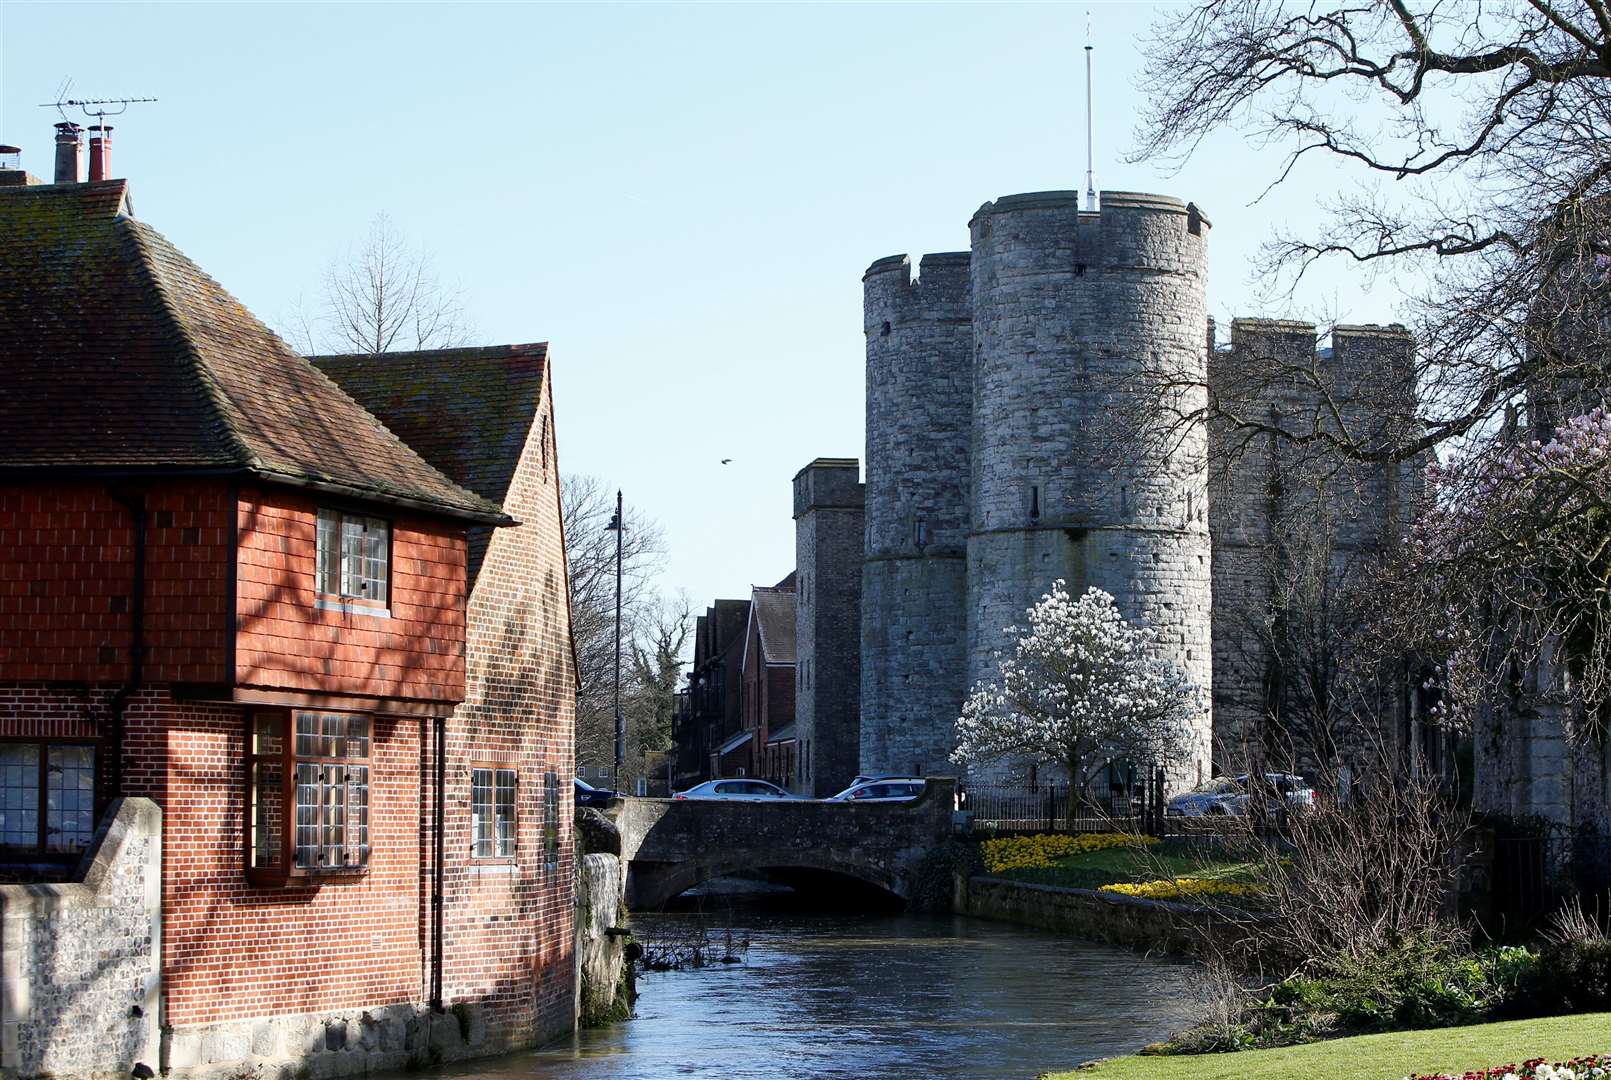 Canterbury's Westgate Towers - where Robert Cushman at one stage found himself incarcerated